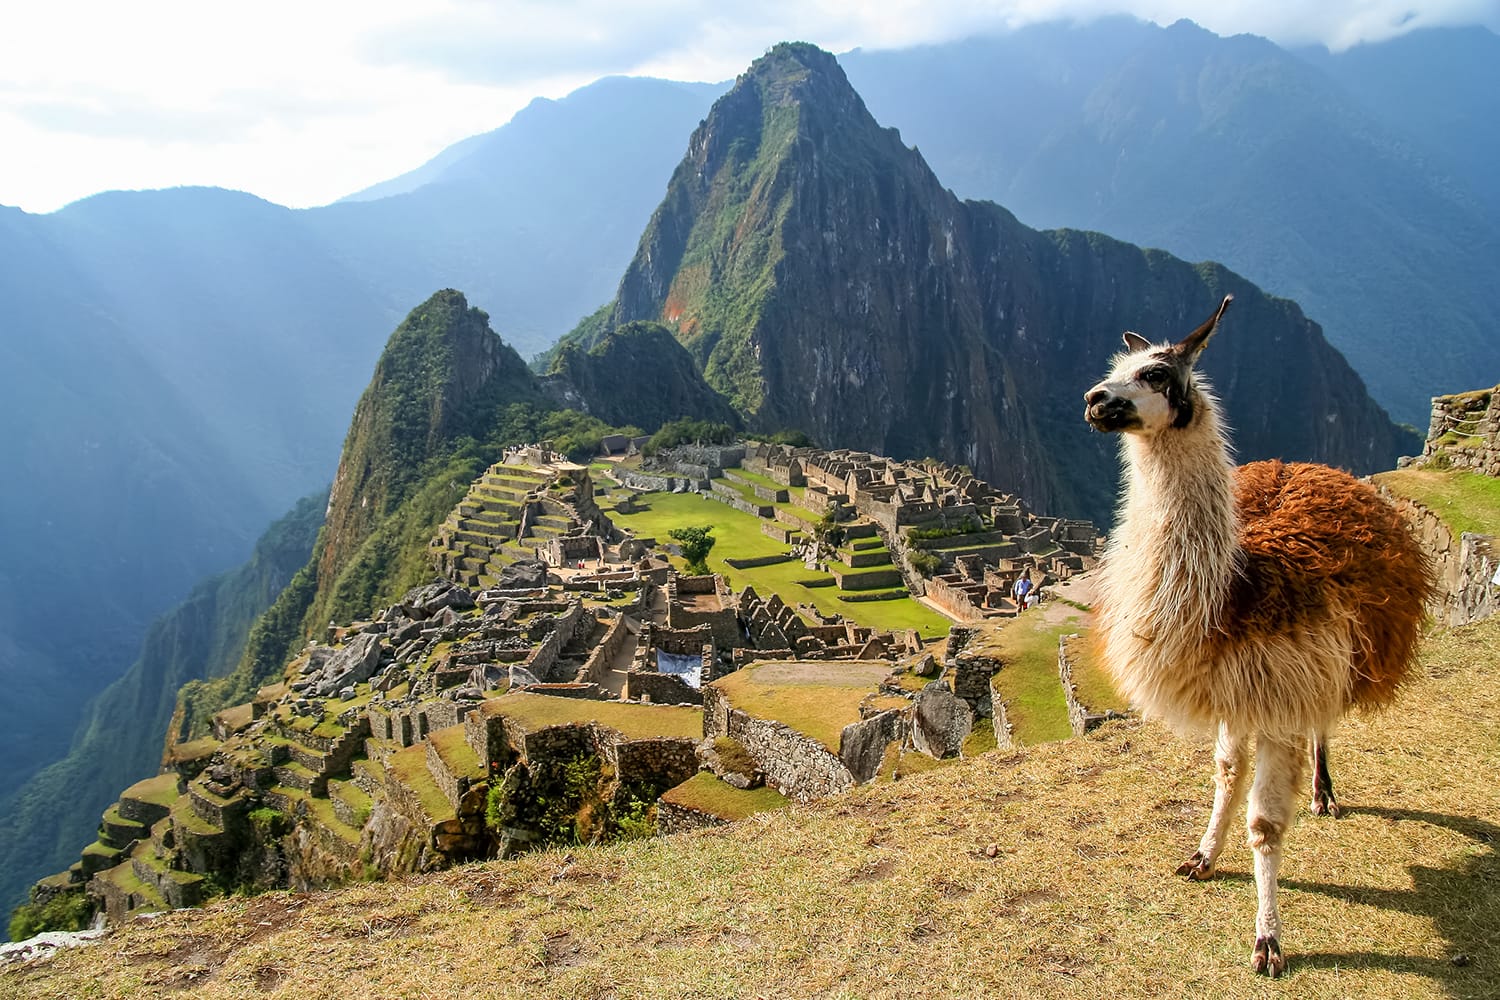 A Llama in front of the ancient inca town of Machu Picchu